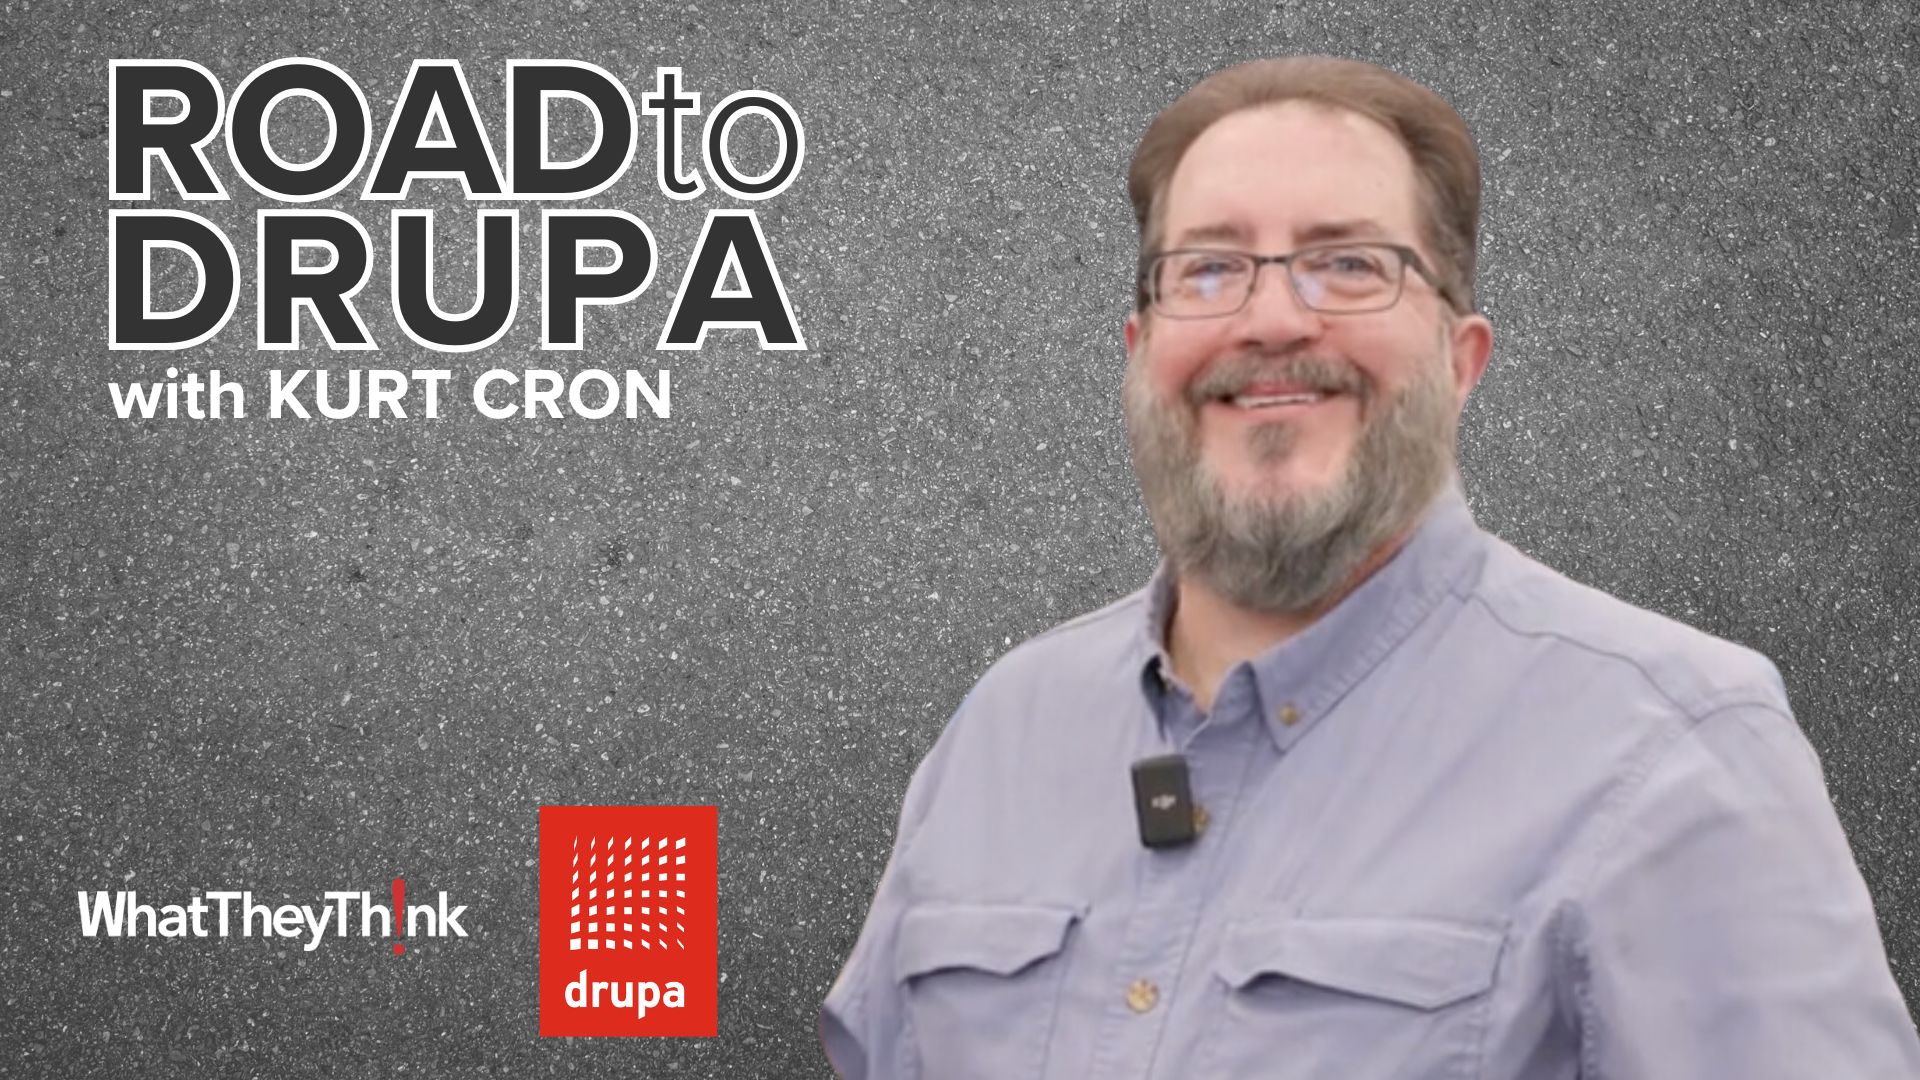 The Road to drupa: Deluxe Corporation